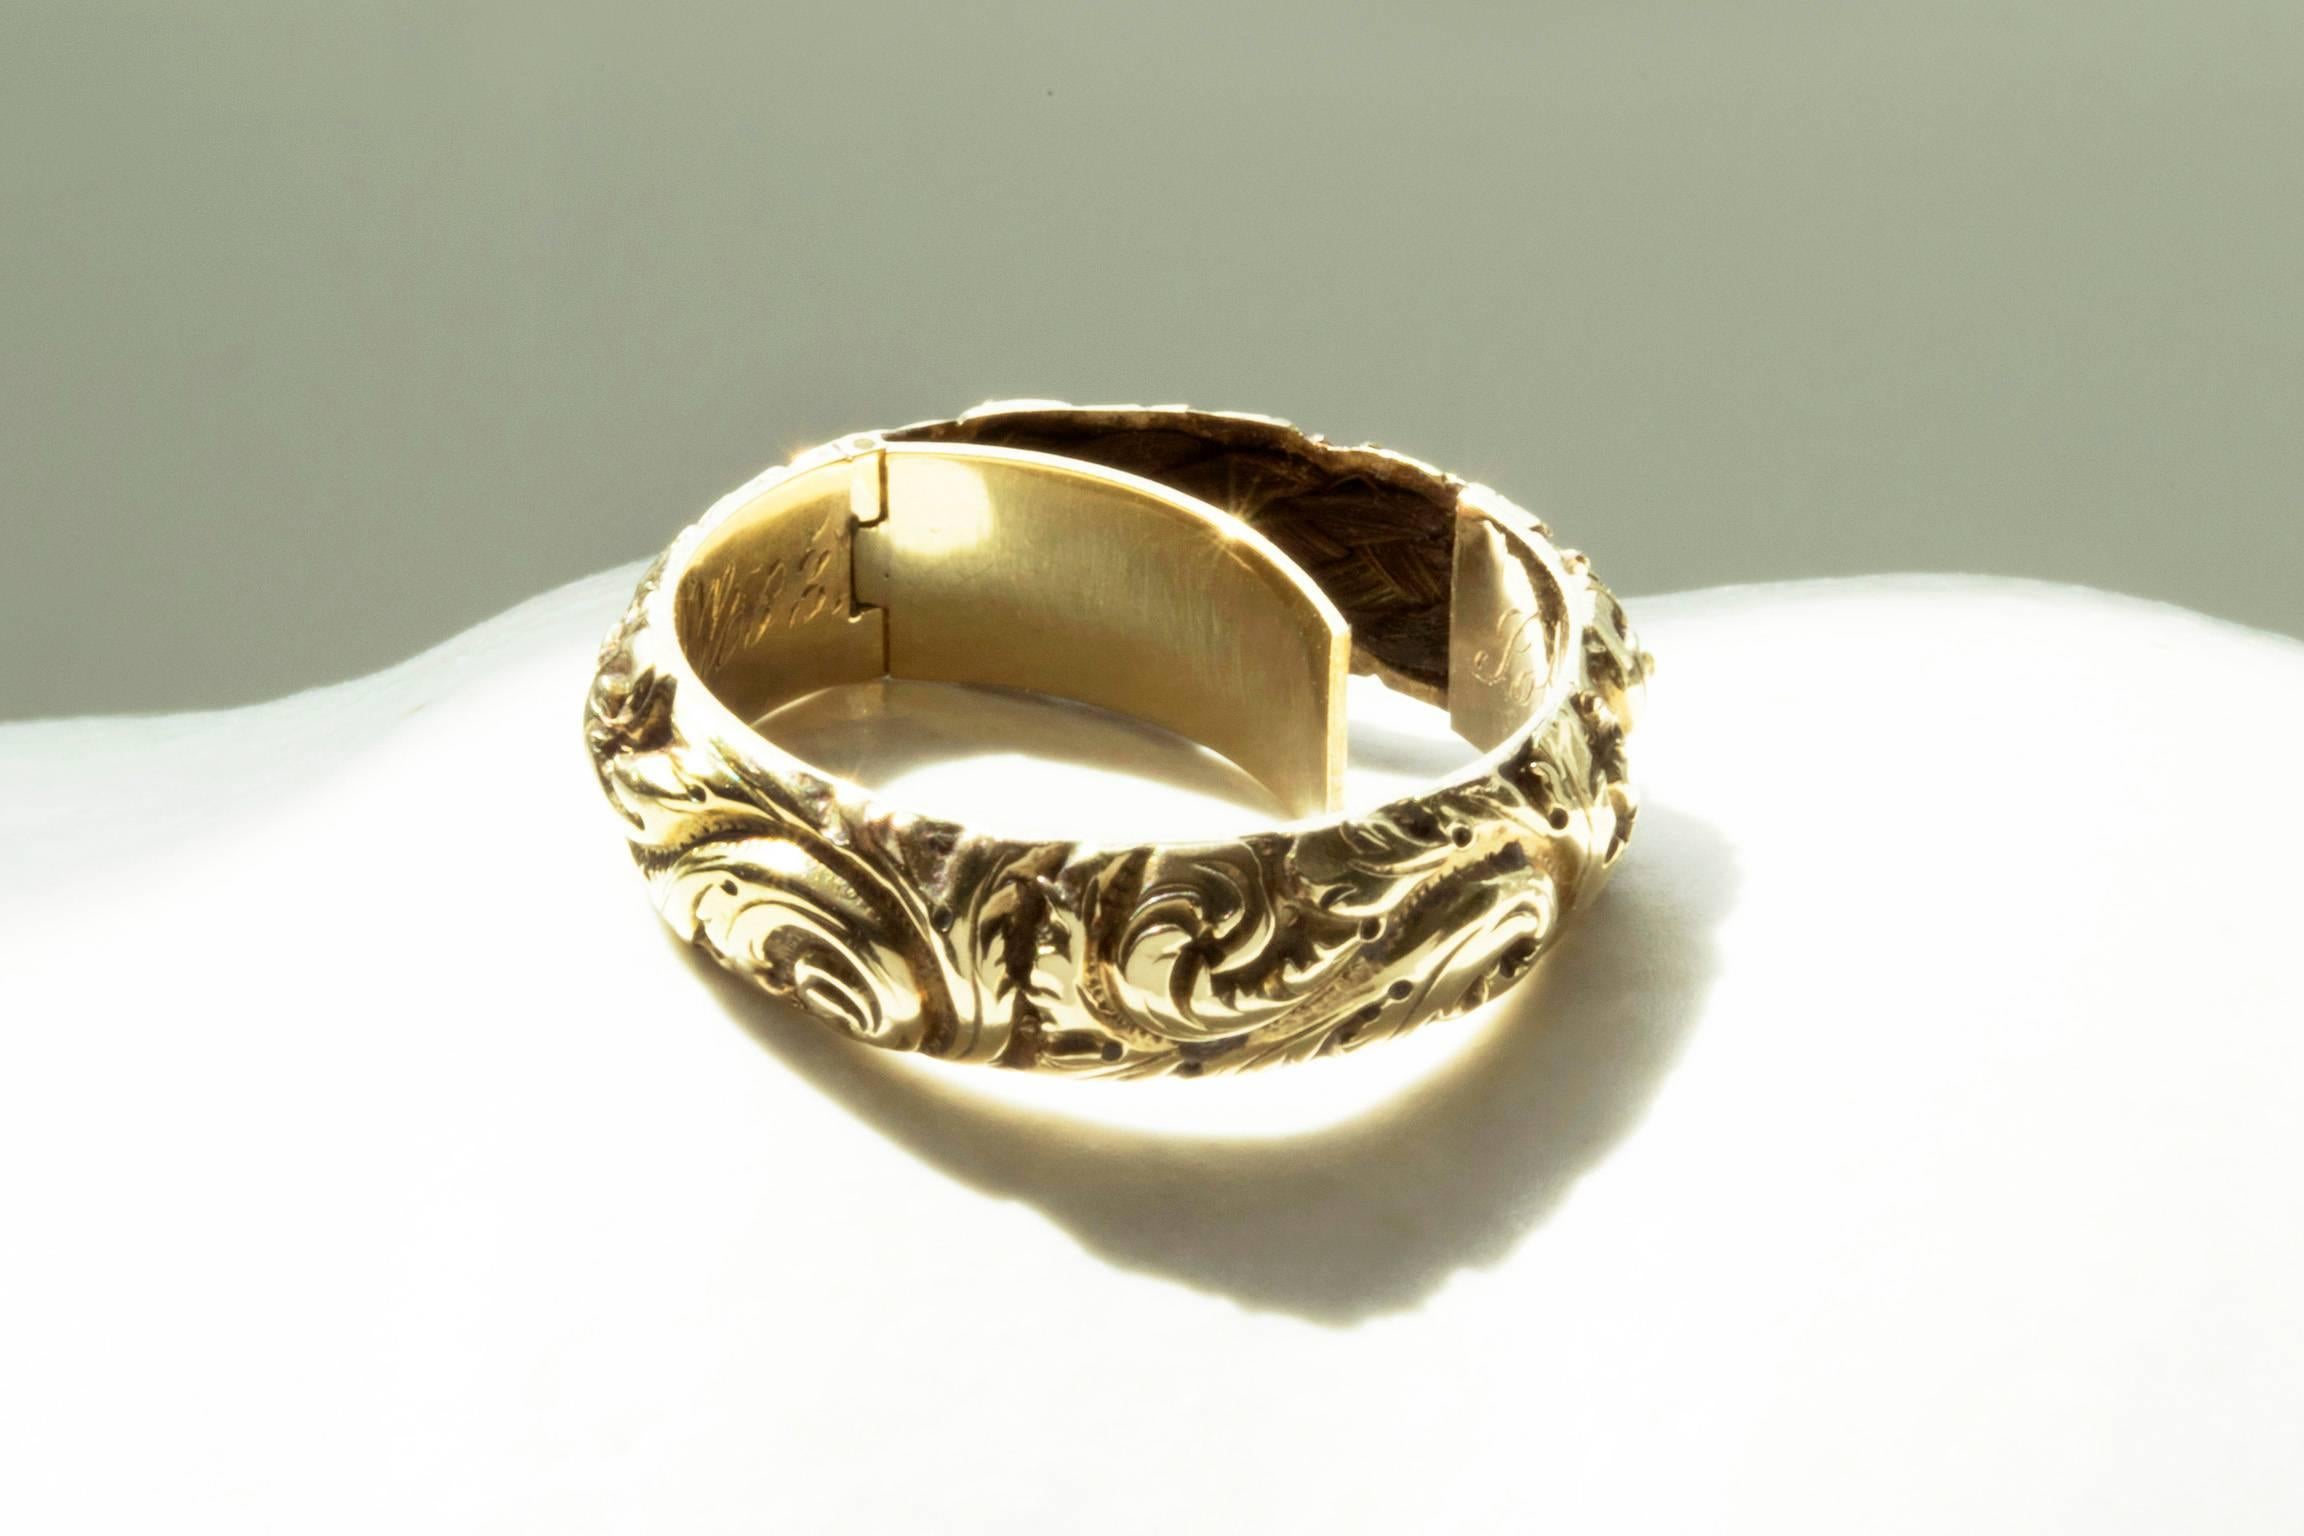 C.1822. A beautifully chased Georgian gold band with a hidden compartment. The band has a secret compartment that opens from inside. It contains a lock of woven hair that has remained intact. The inscription at inner band reads- John Hardwick, ob,